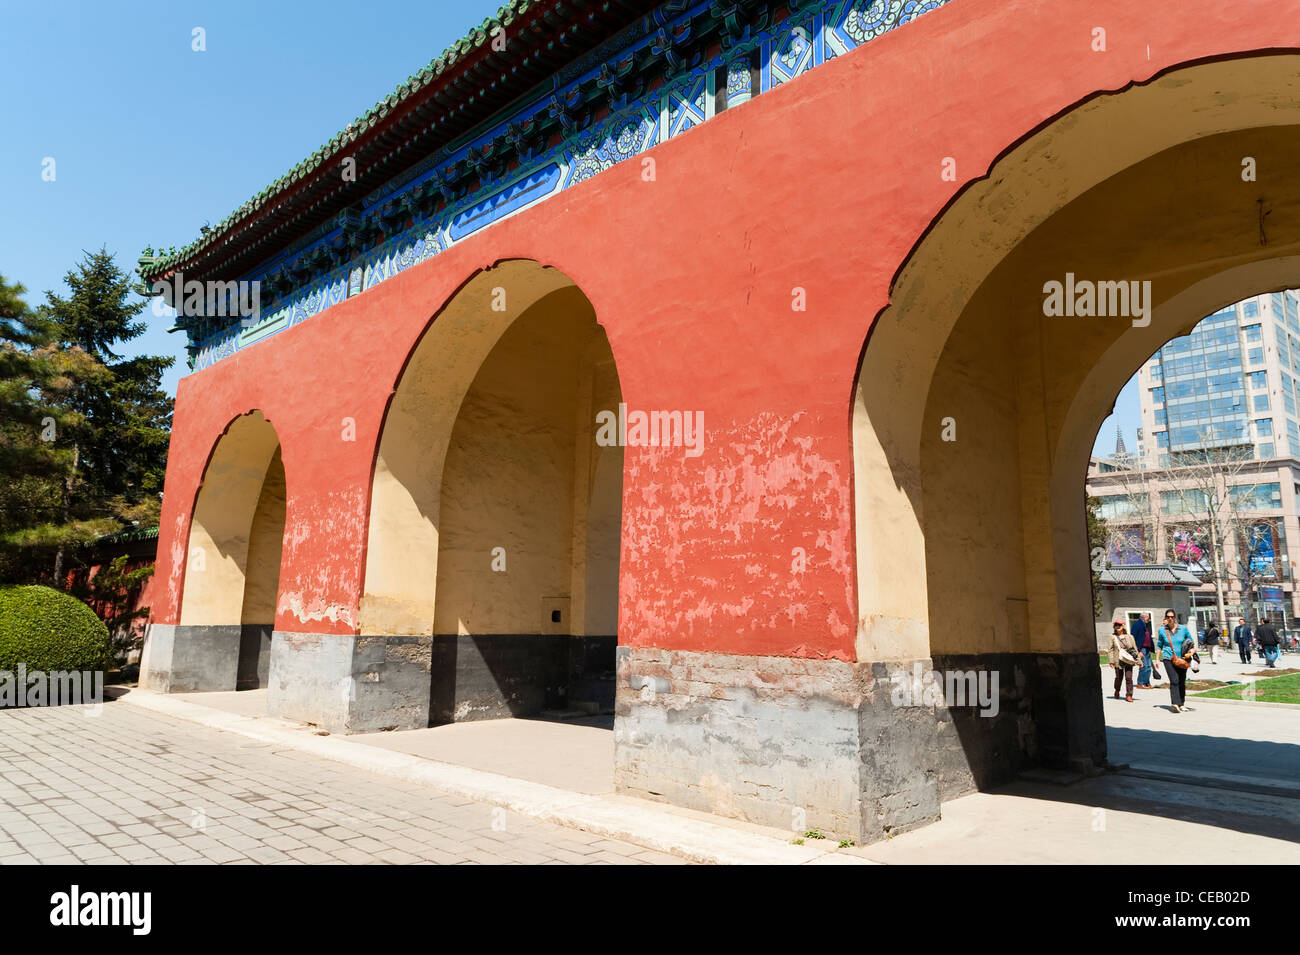 Archway, Ritan Park, Chaoyang District, Beijing, China, Asia. Stock Photo